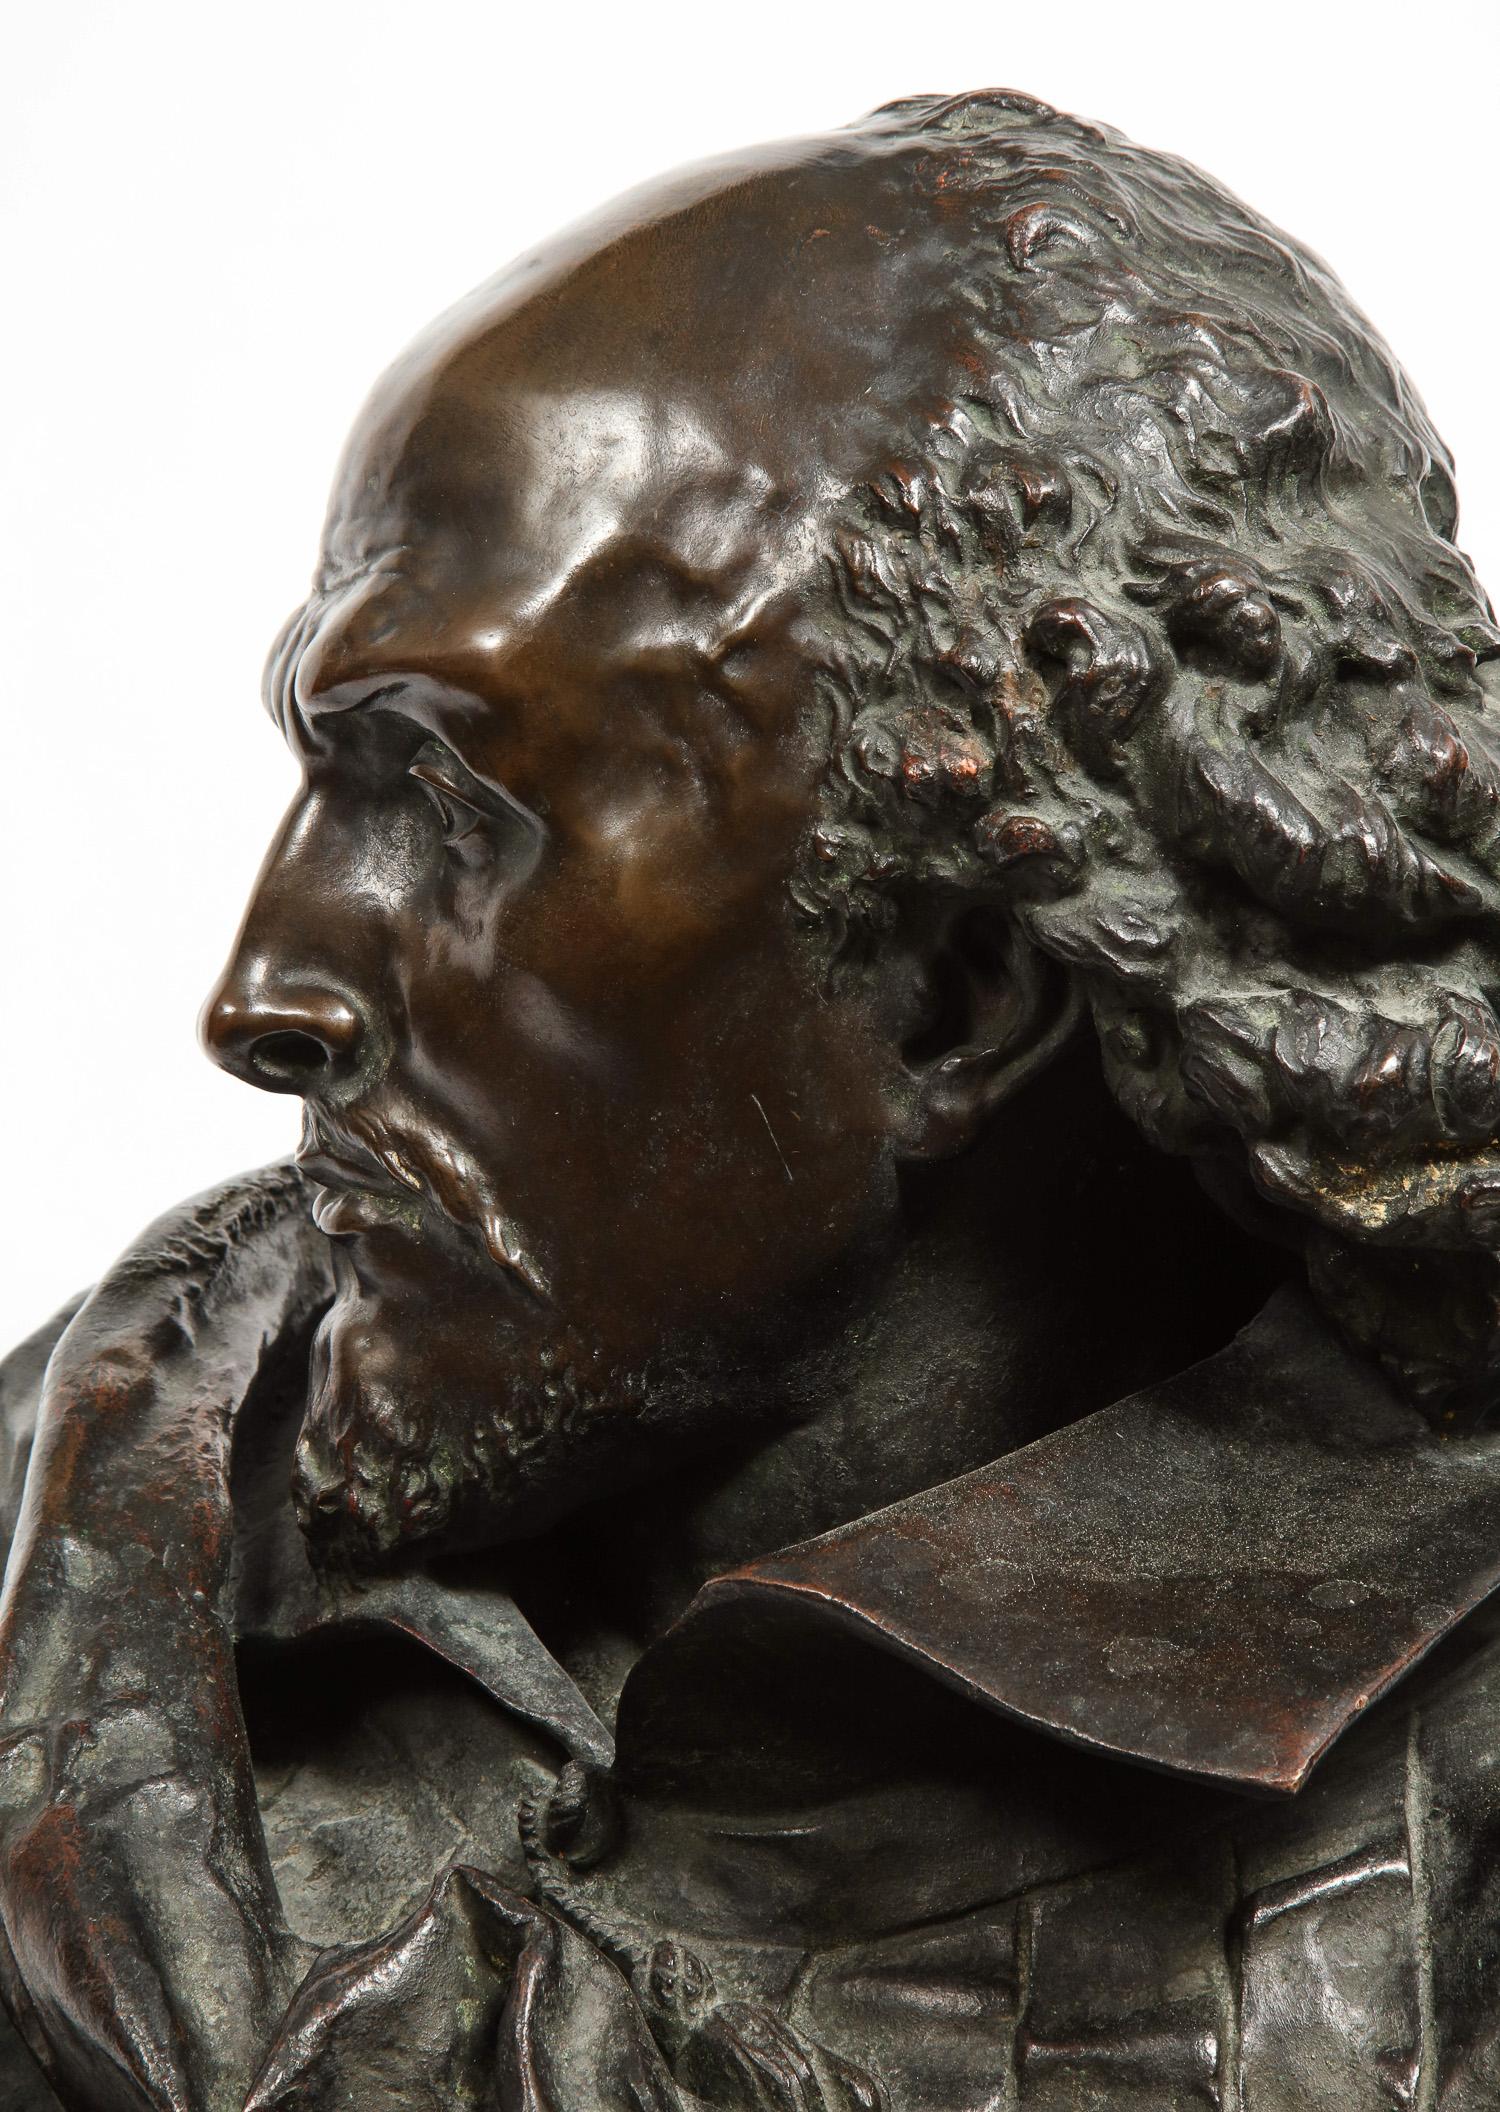 Romantic Rare French Patinated Bronze Bust of William Shakespeare, Carrier-Belleuse